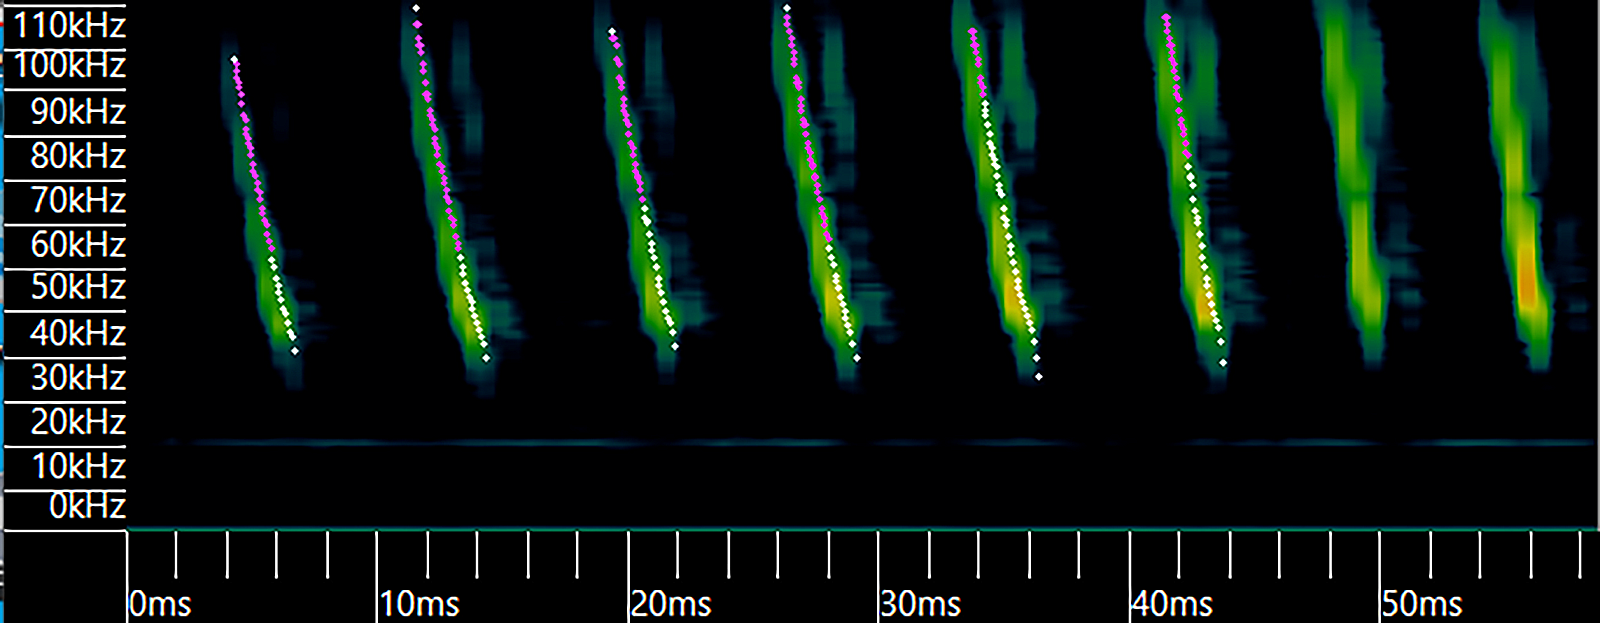 Graph of eight rapidly descending notes, in kilohertz, over about 60 milliseconds.